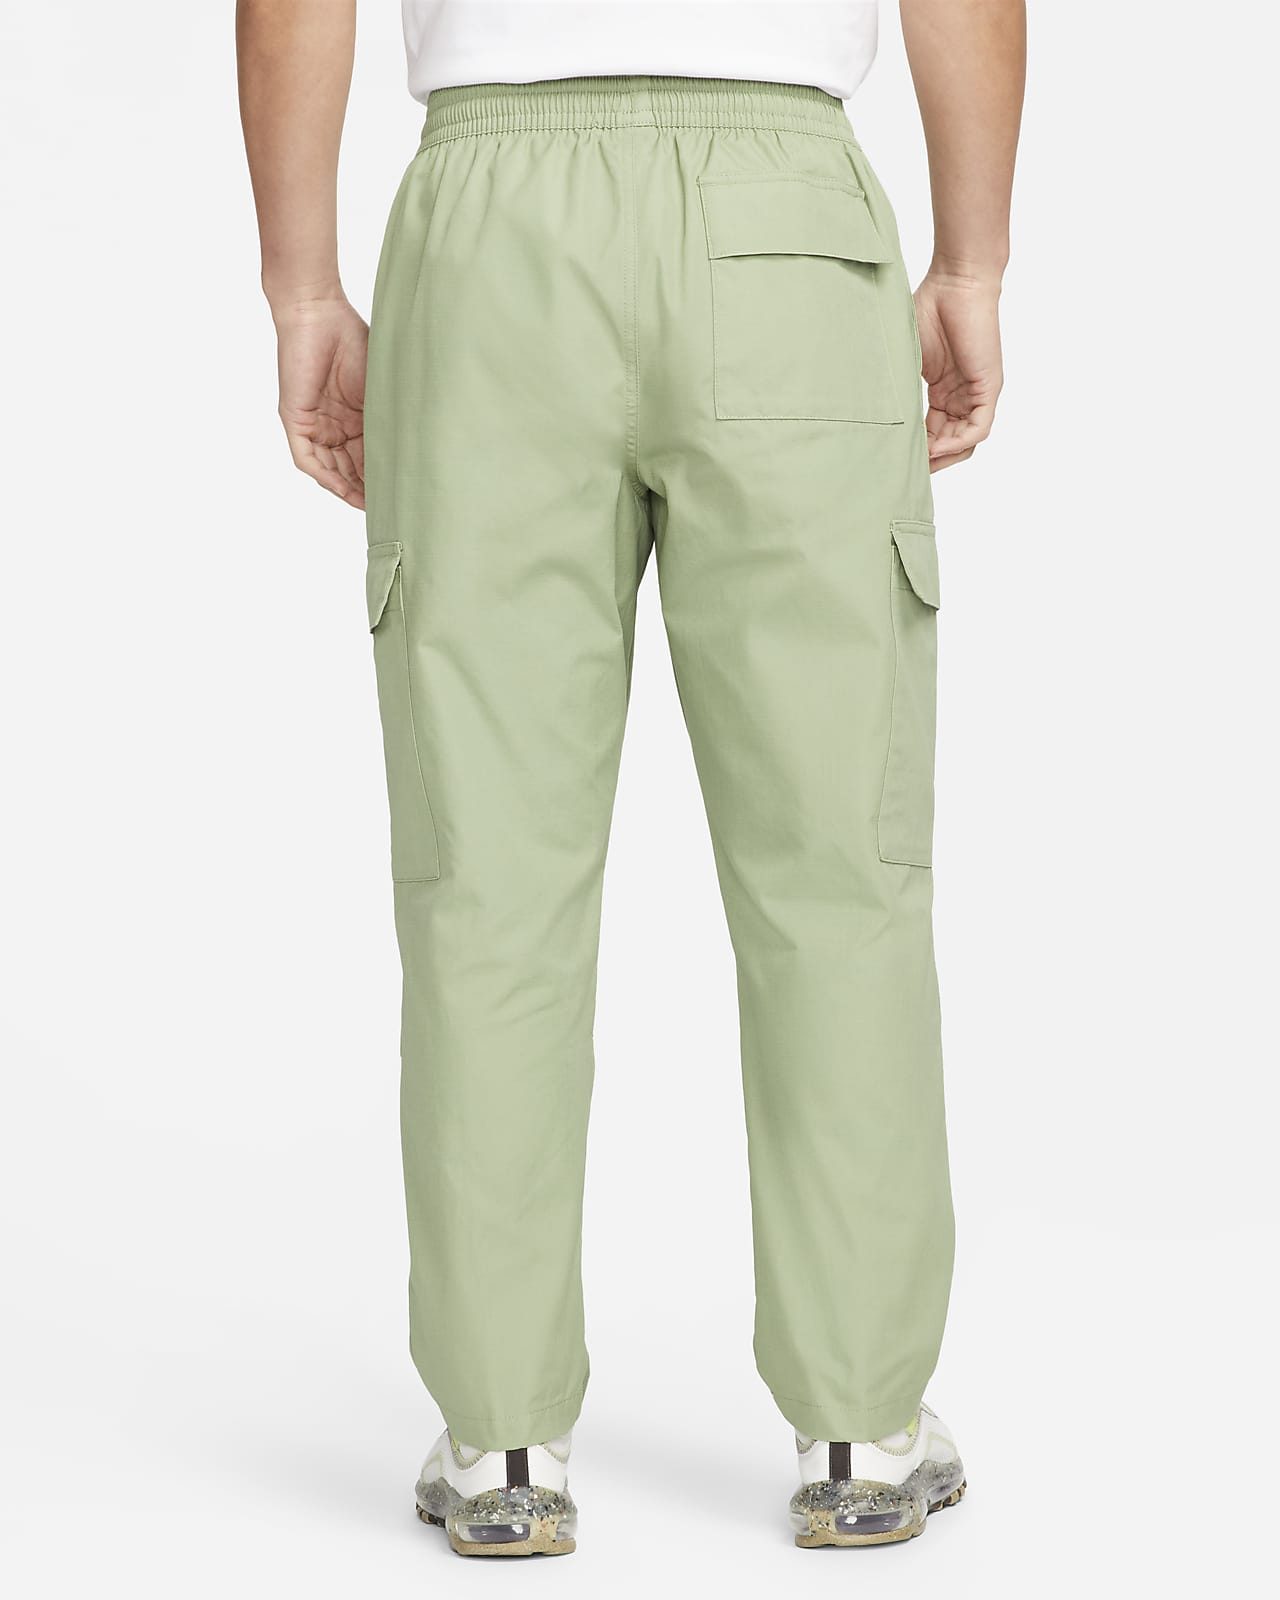 Nike Outdoor Play Big Kids' Woven Cargo Pants. Nike.com | The Summit at  Fritz Farm